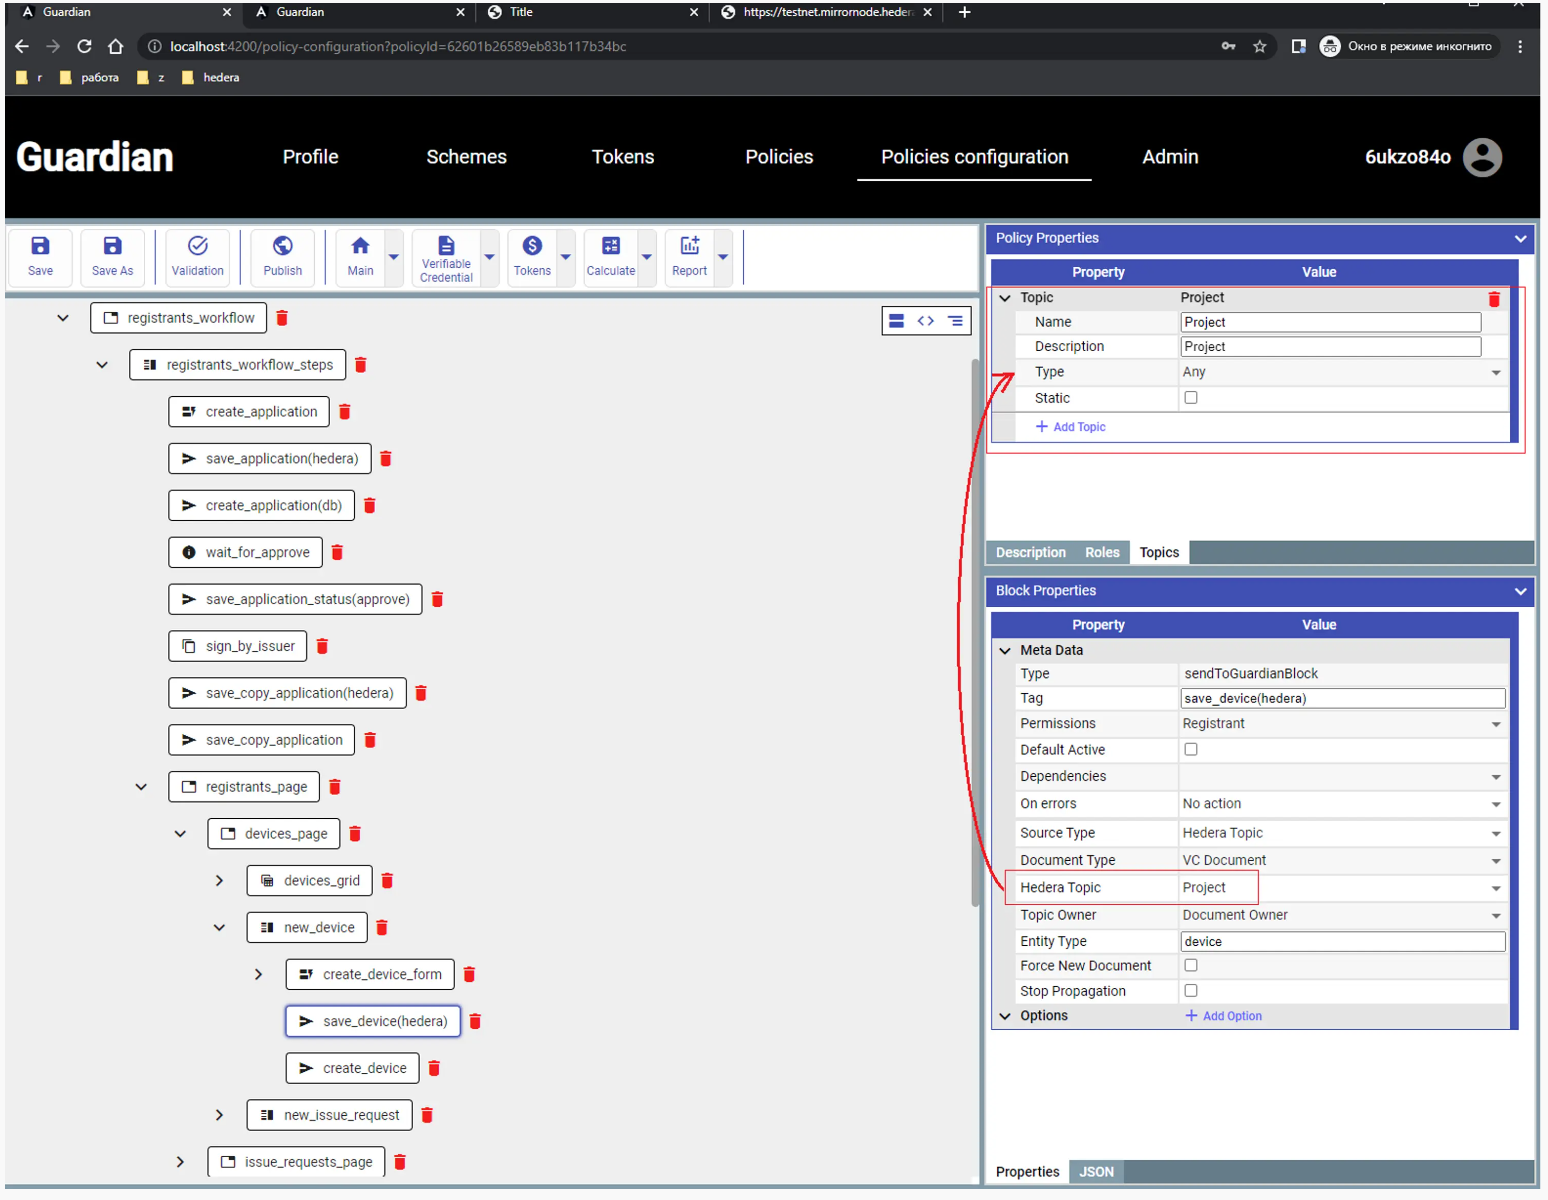 A screenshot that shows how Projects are created from within the Guardian’s policy configuration screen